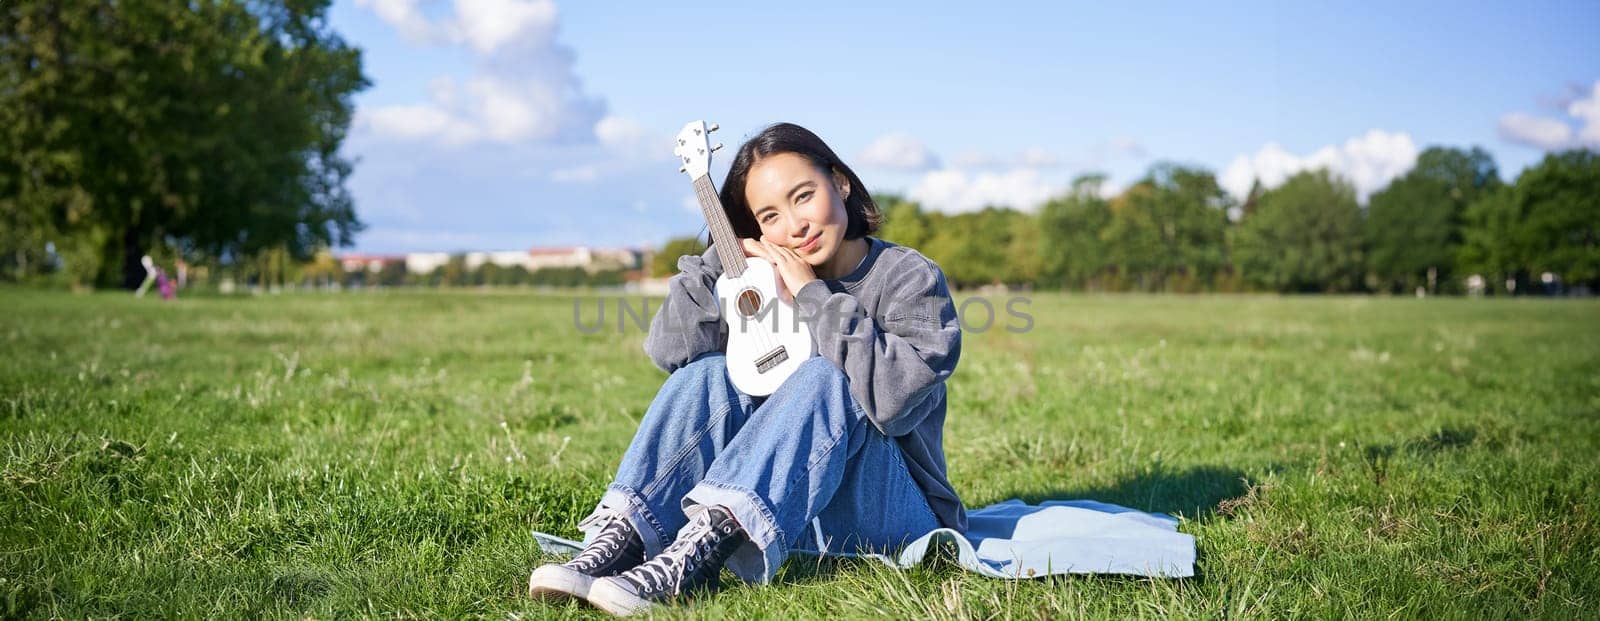 Cute romantic asian girl sitting with her instrument in park, hugging ukulele and smiling, resting outdoors.